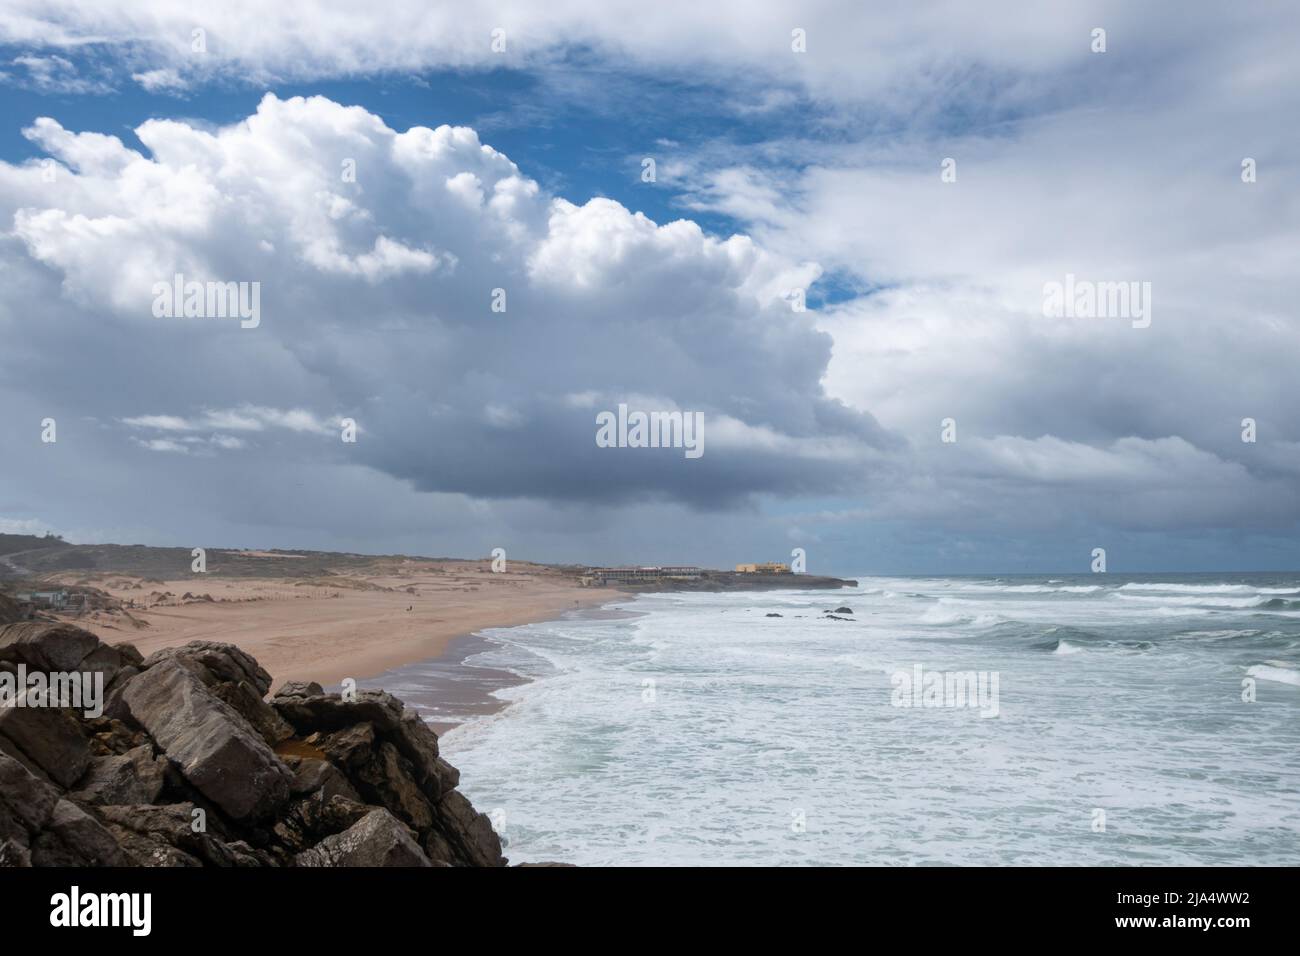 Large and numerous Atlantic Oceas waves rolling into the rocky coastline by Guincho Beach - Praia do Guincho with dramatic clouds in the sky against t Stock Photo